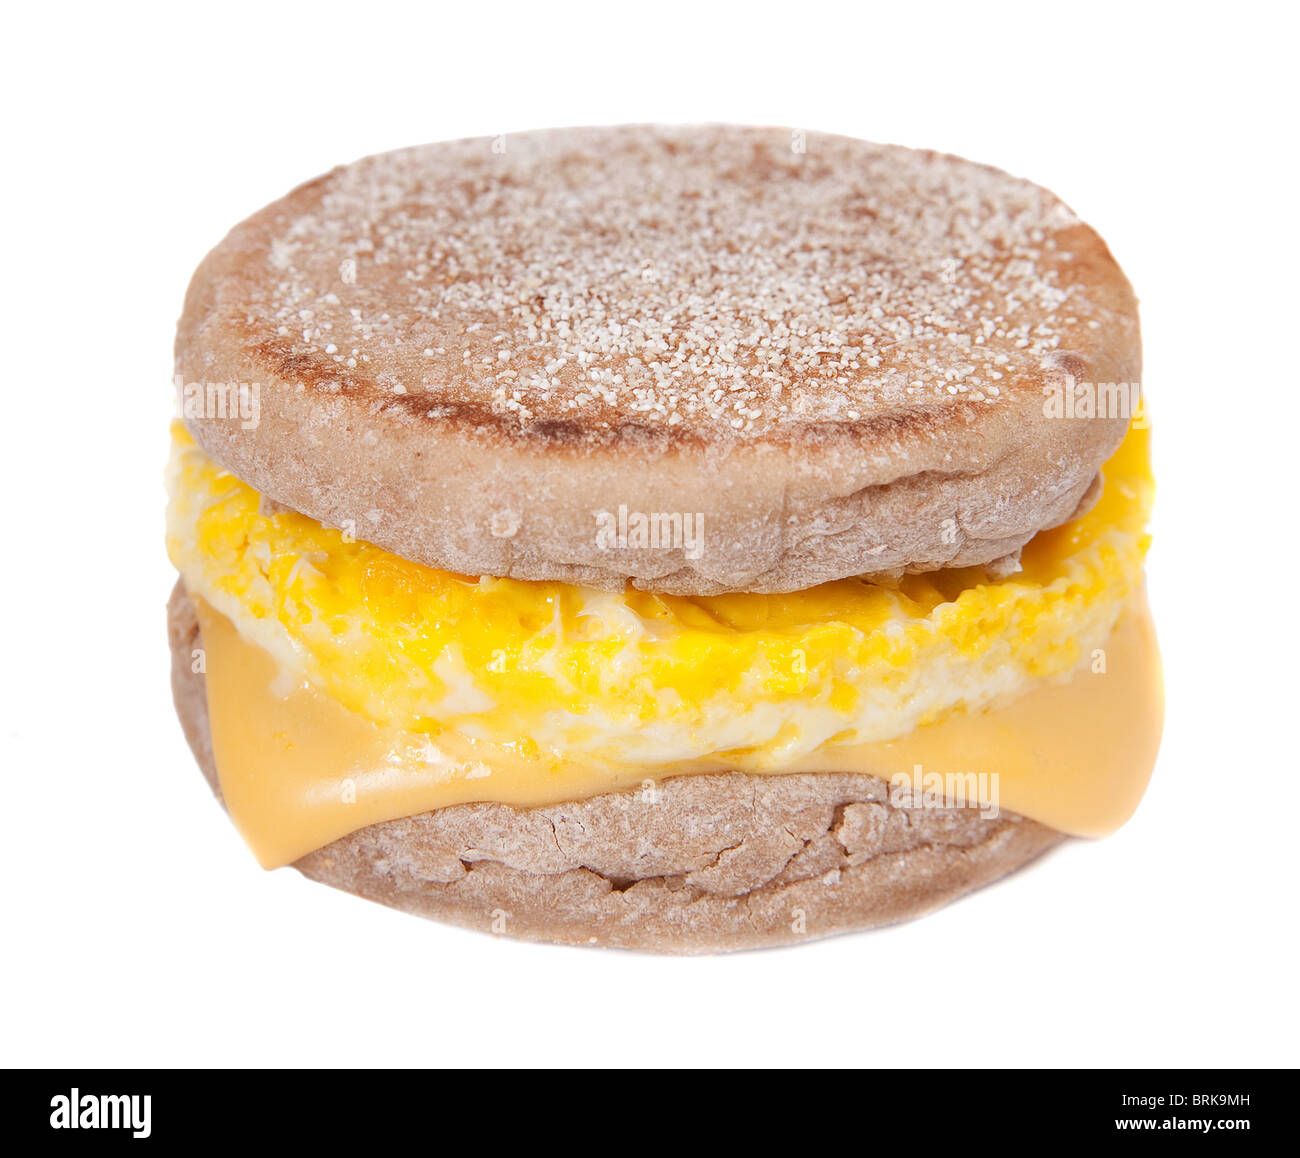 one full size egg muffin with melted cheese on an English muffin Stock Photo